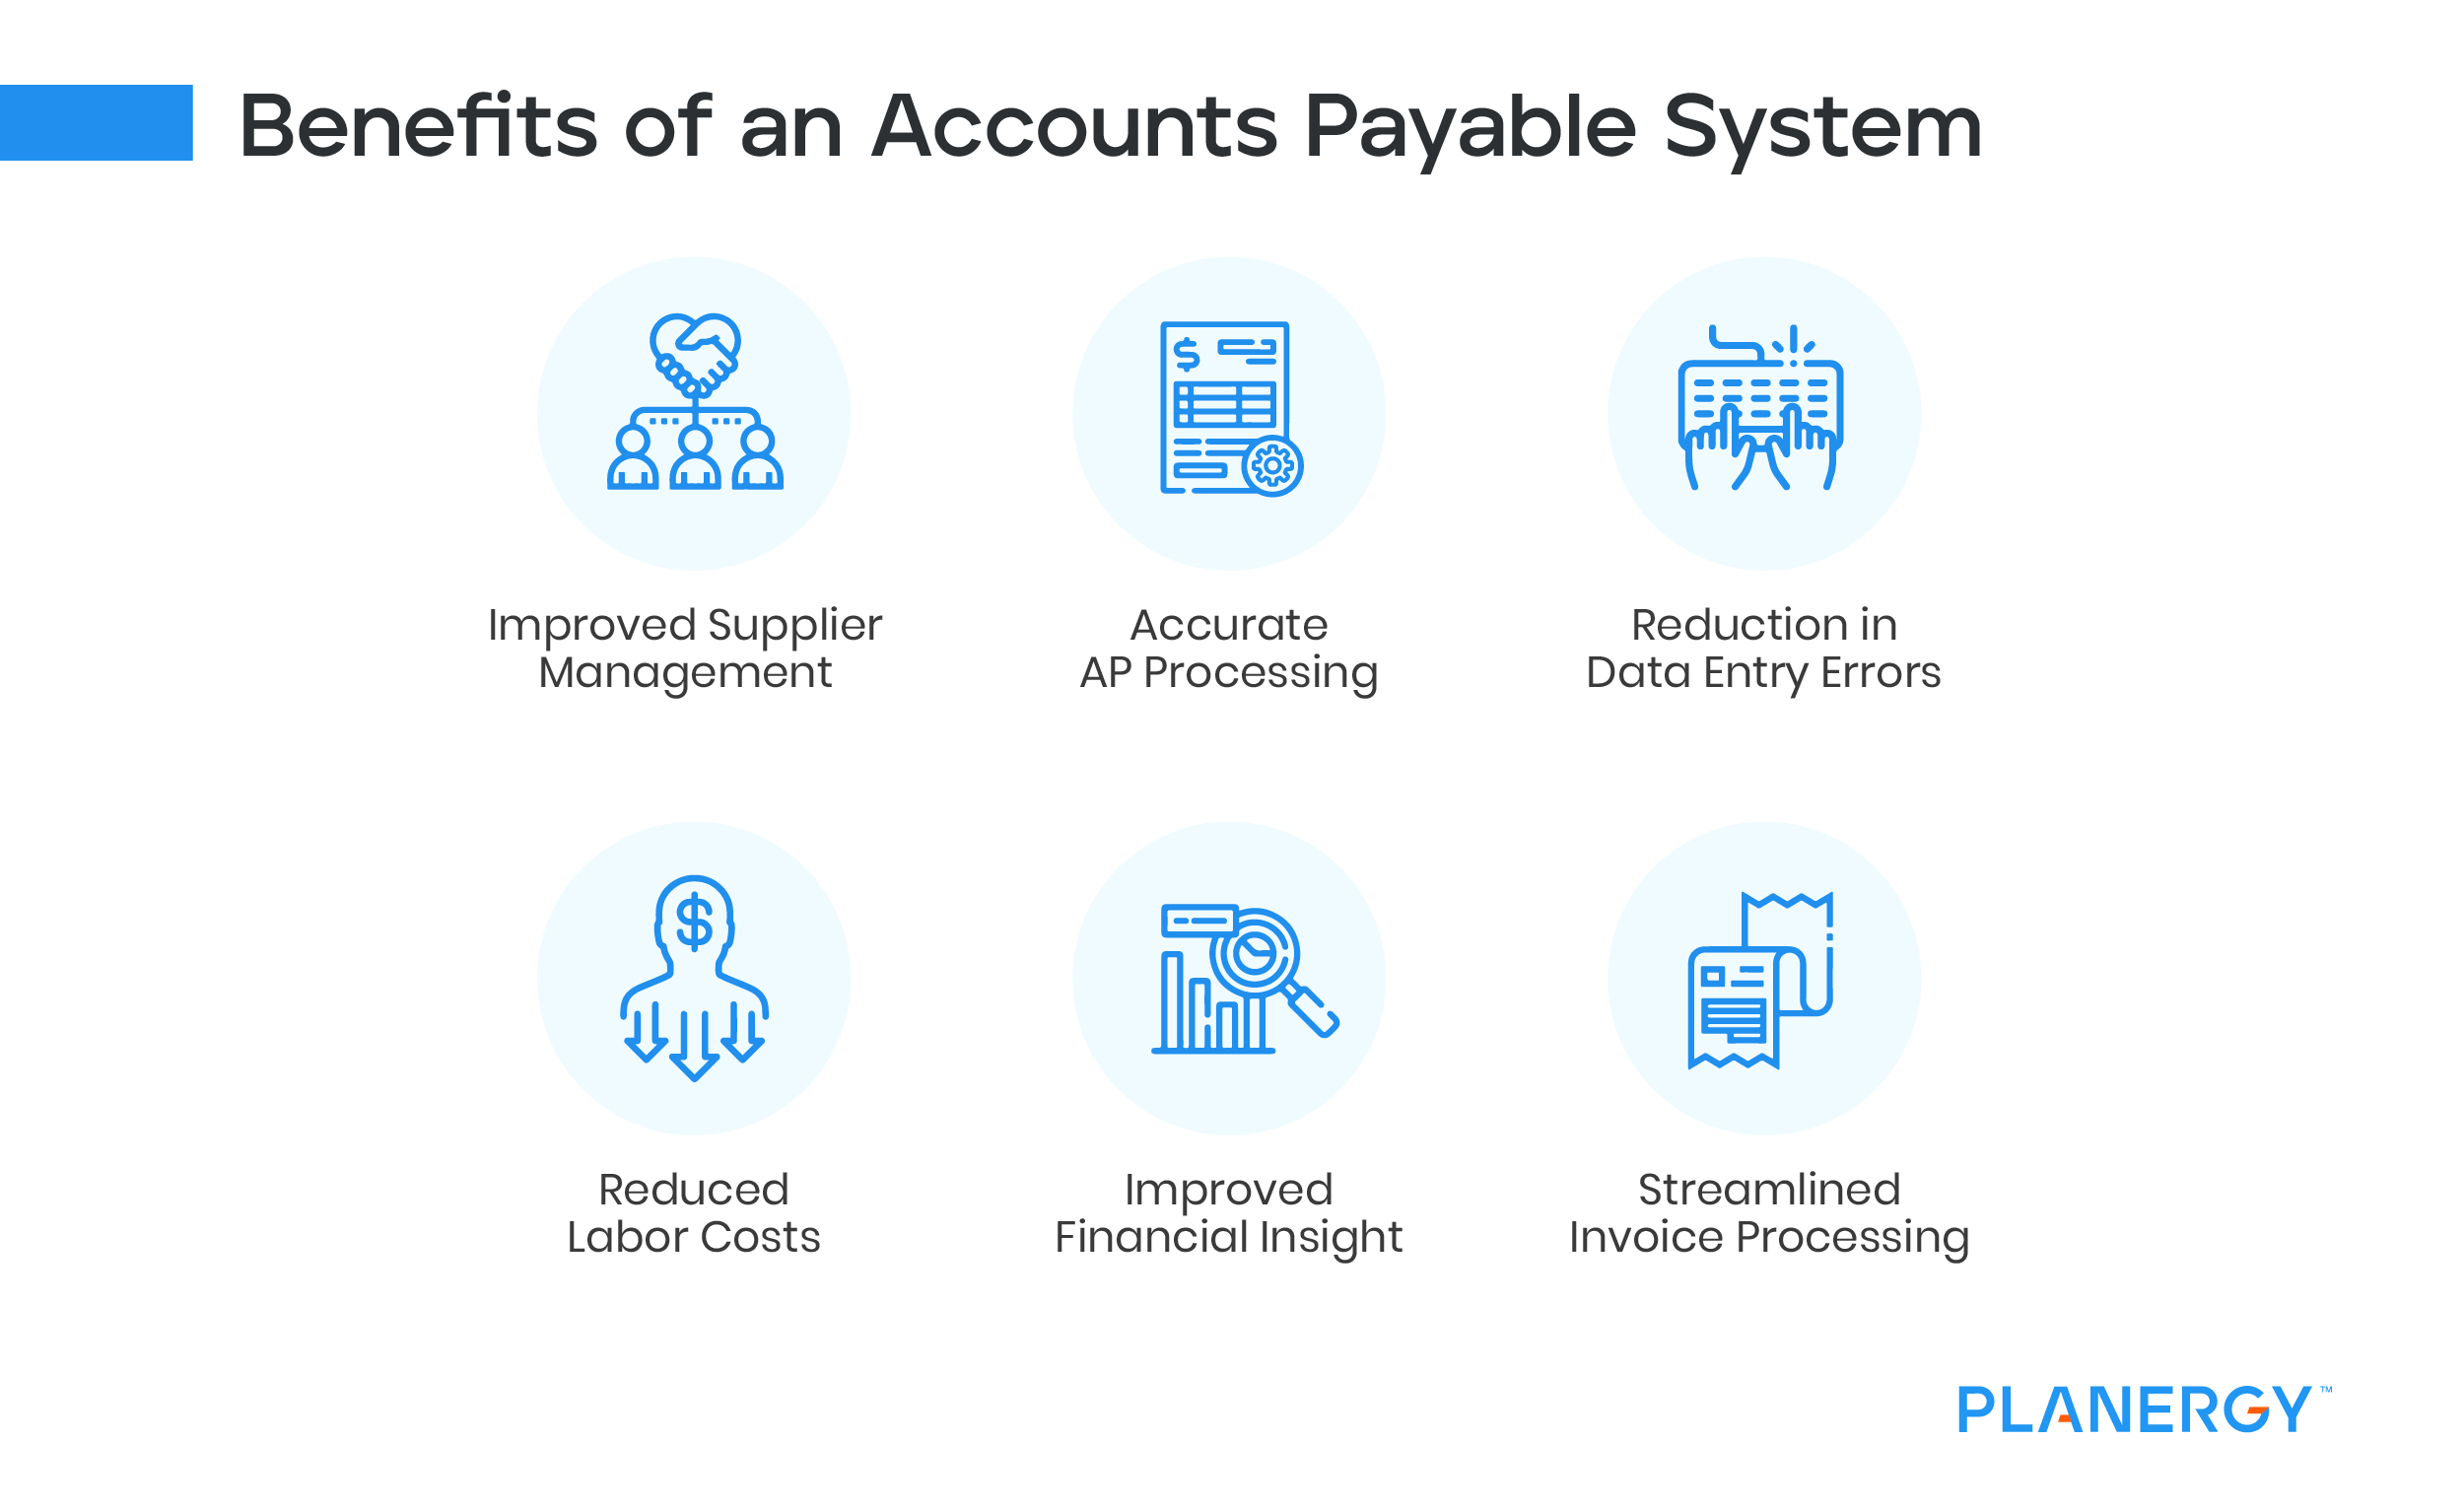 Benefits of an Accounts Payable System